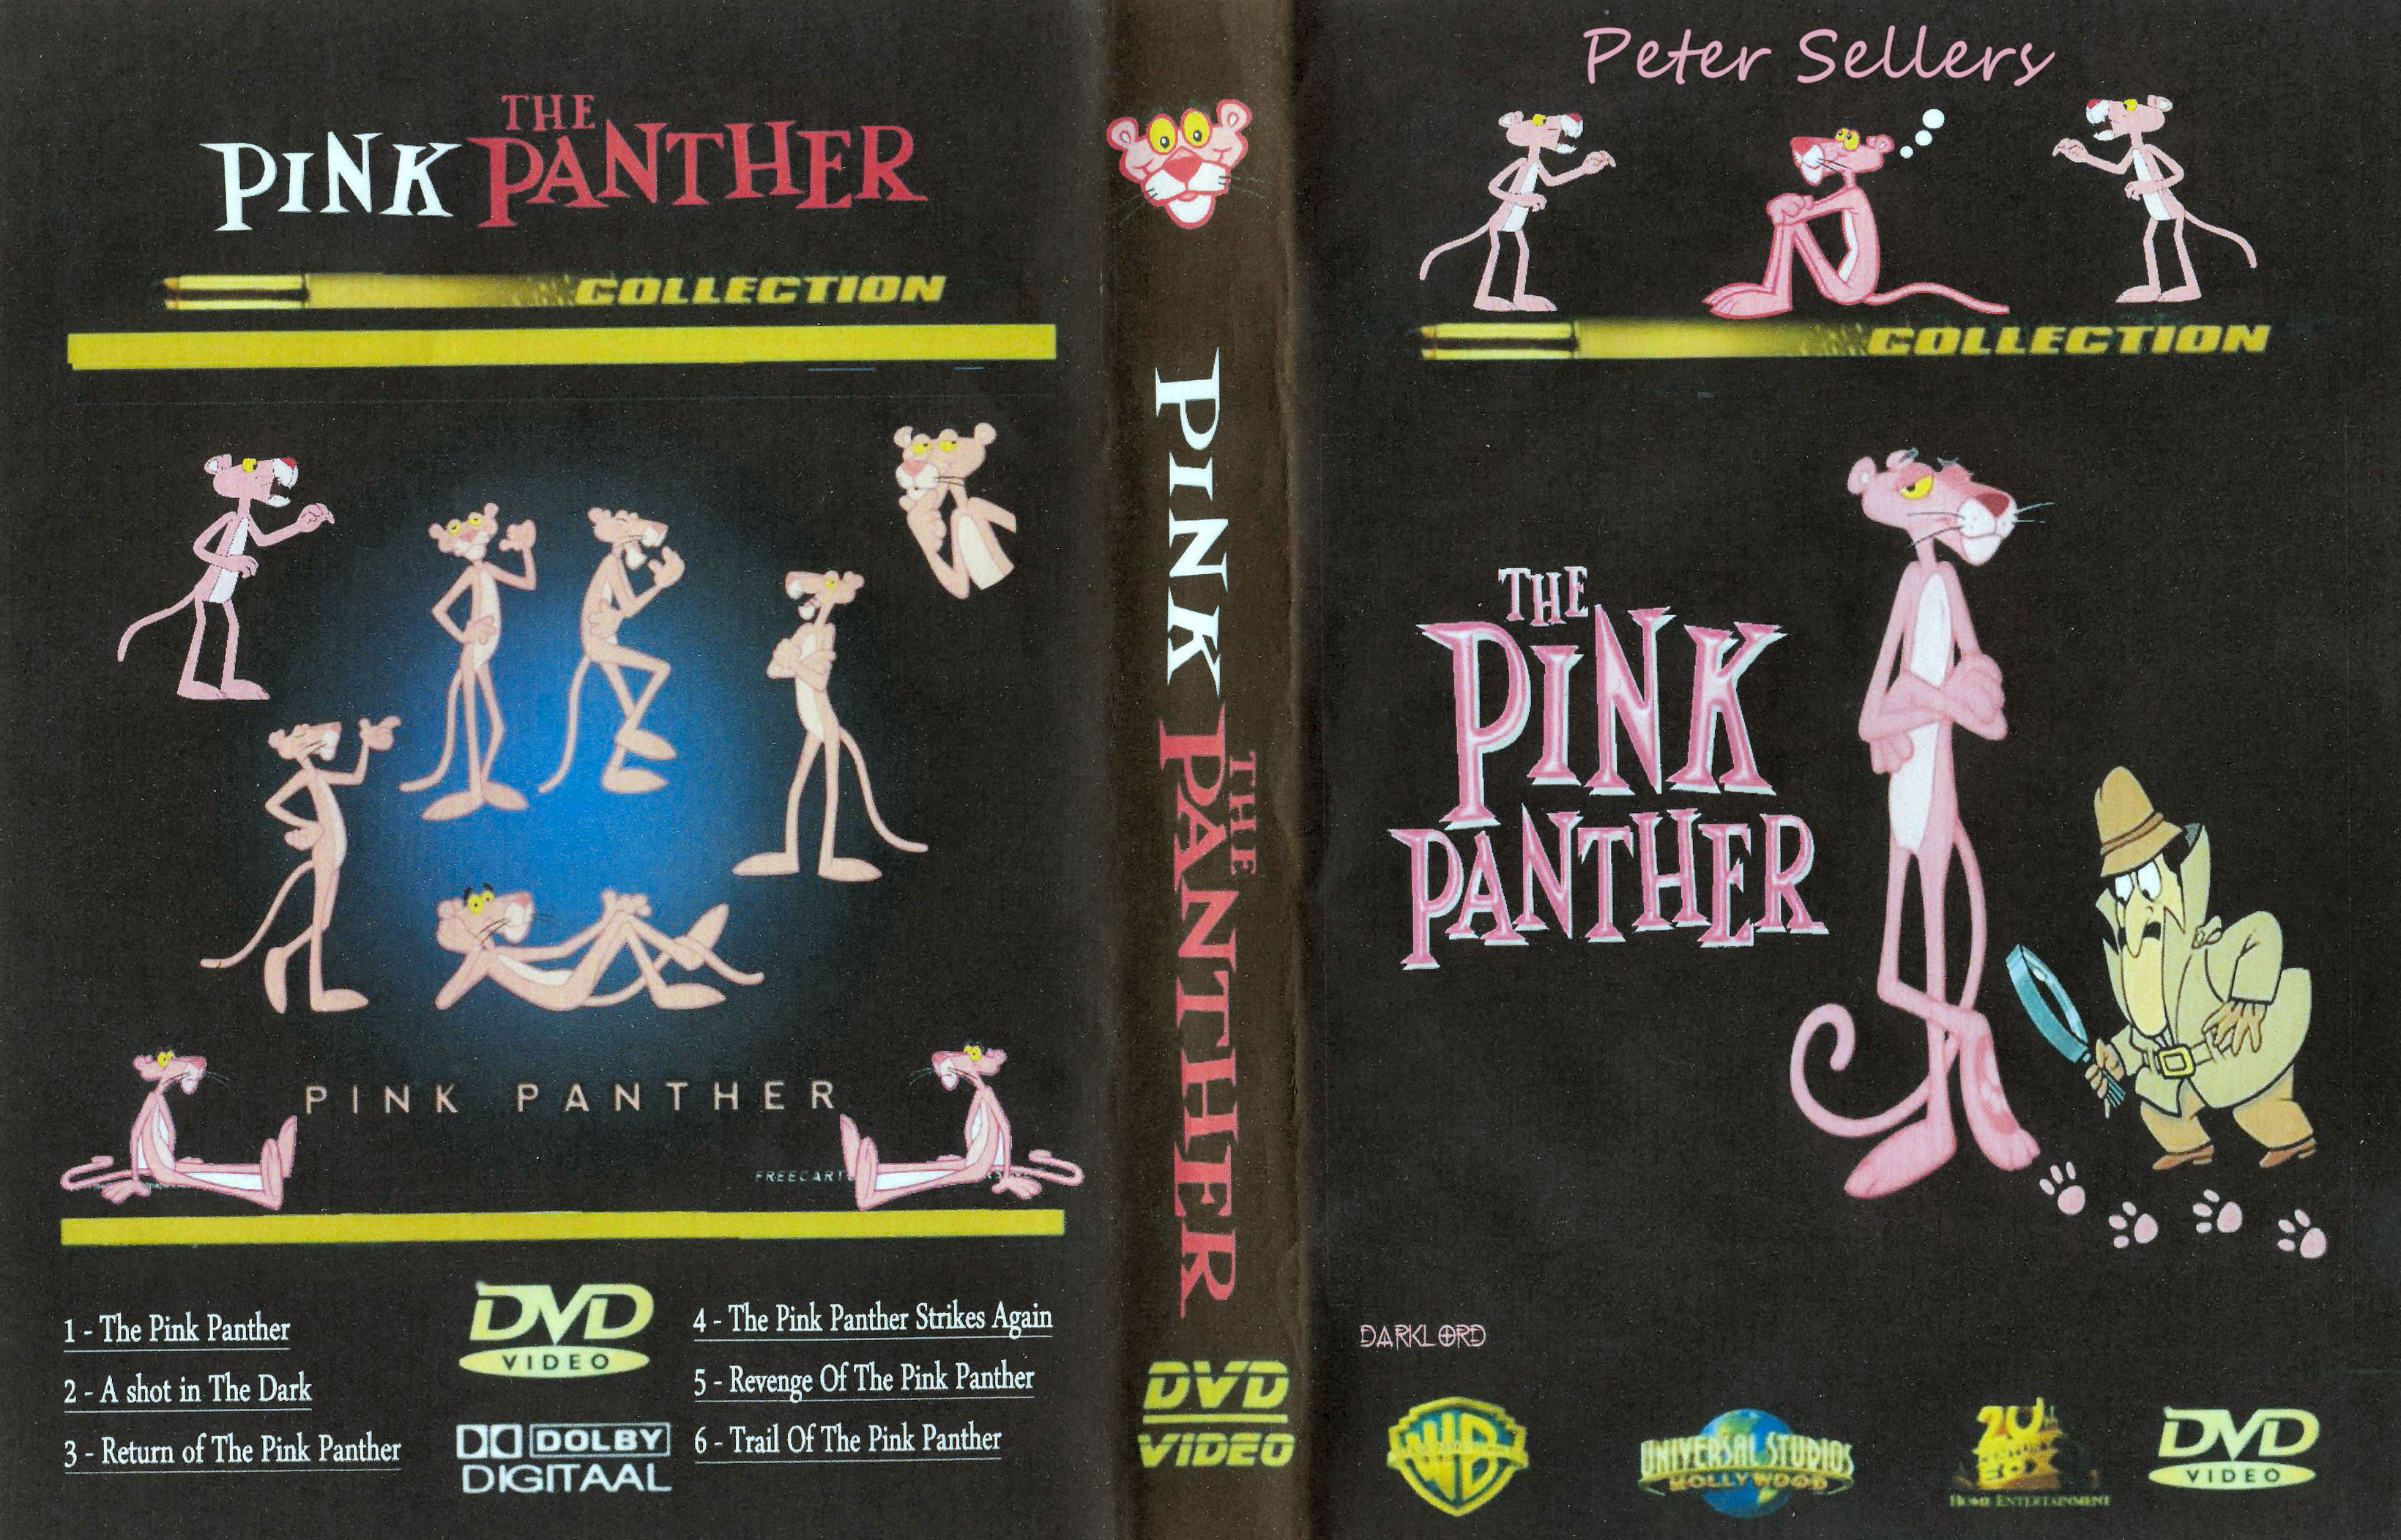 6. Trail of the Pink Panther (1982) De Laatste